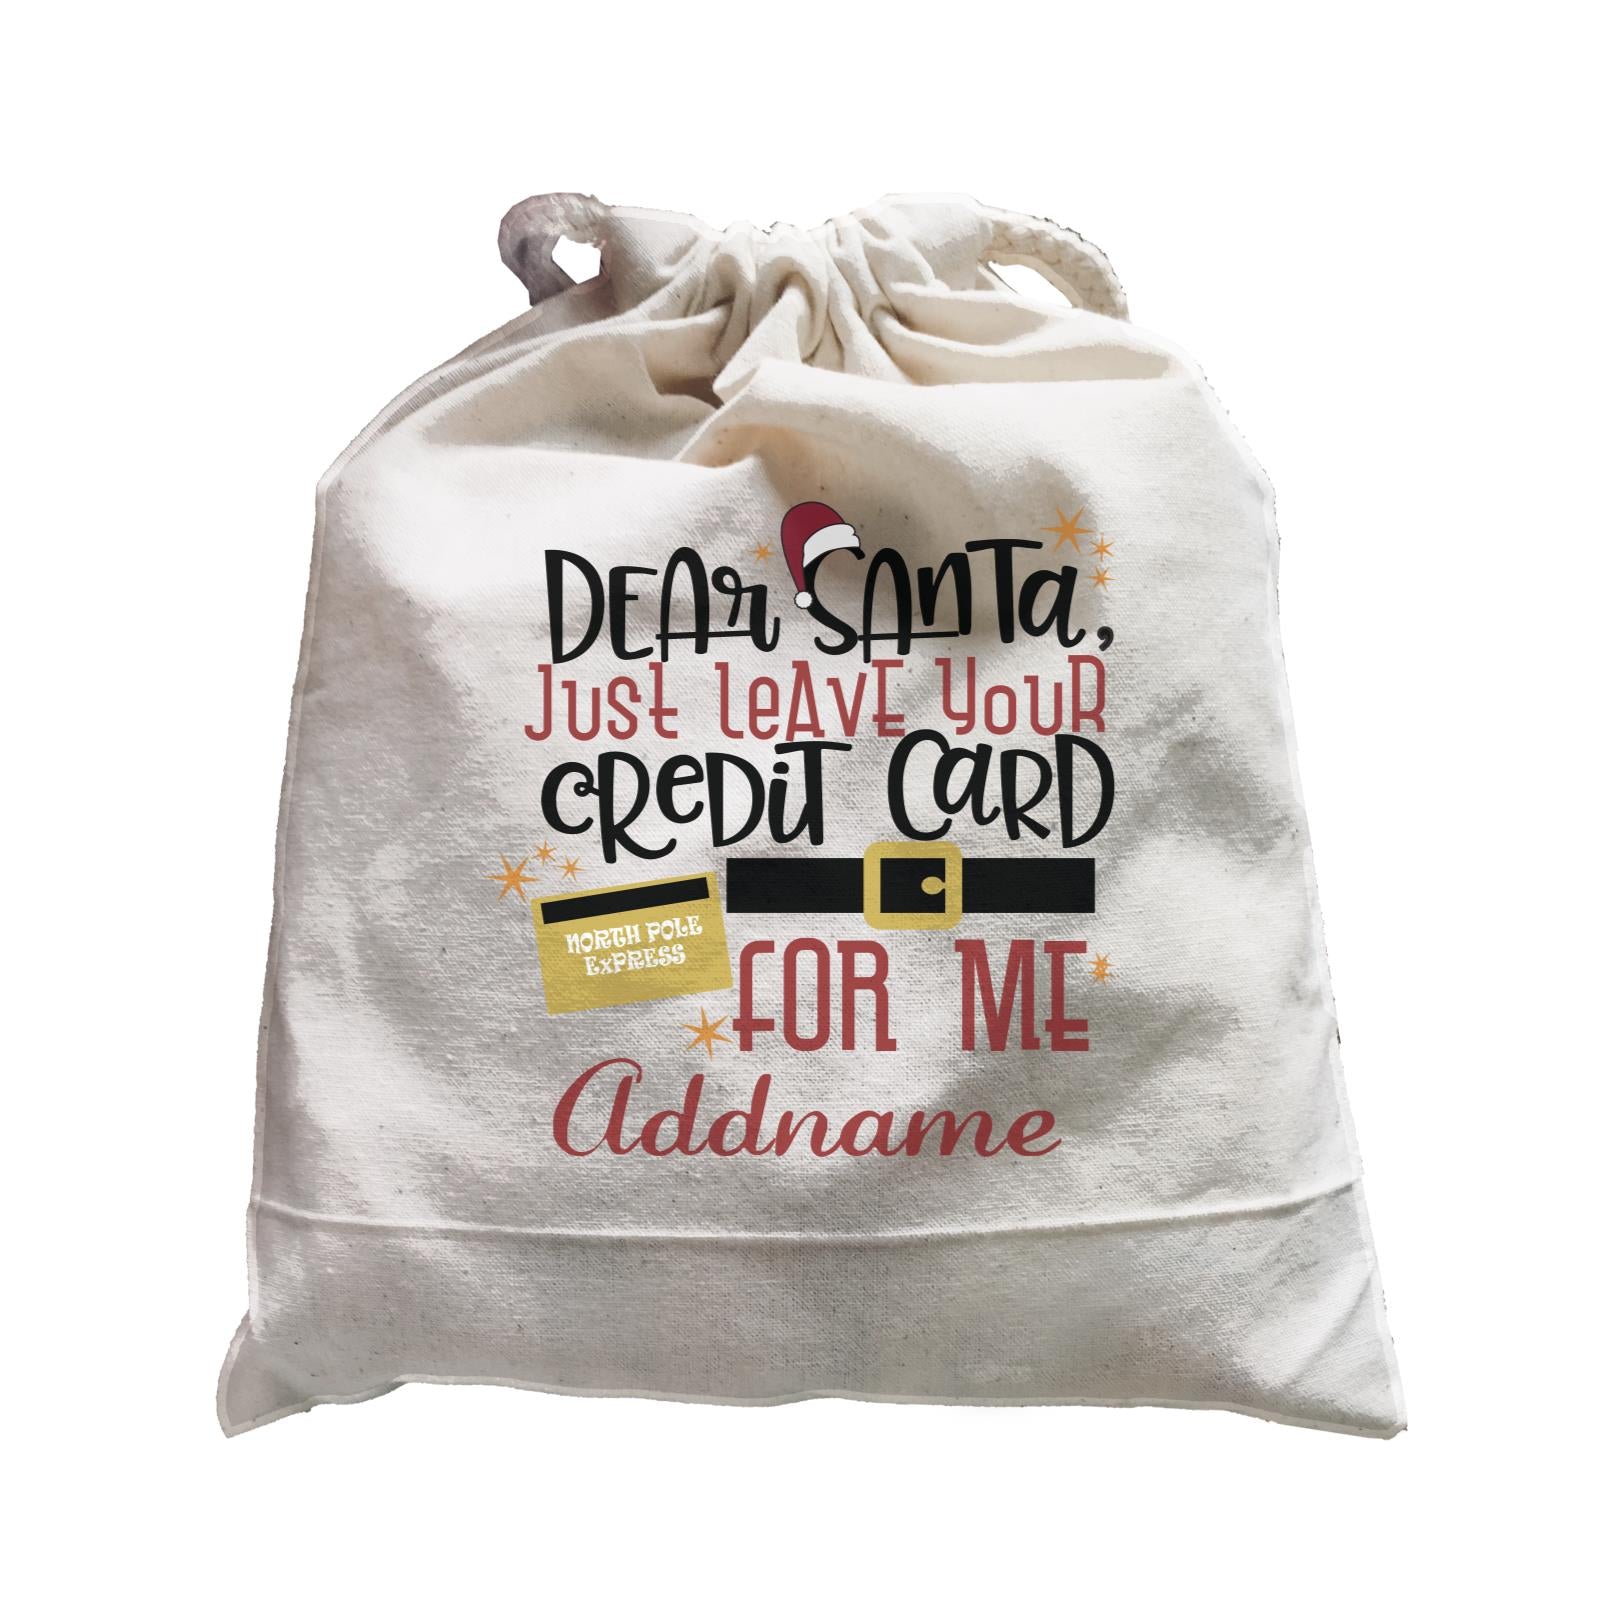 Xmas Dear Santa Just Leave Your Credit Card For Me Satchel